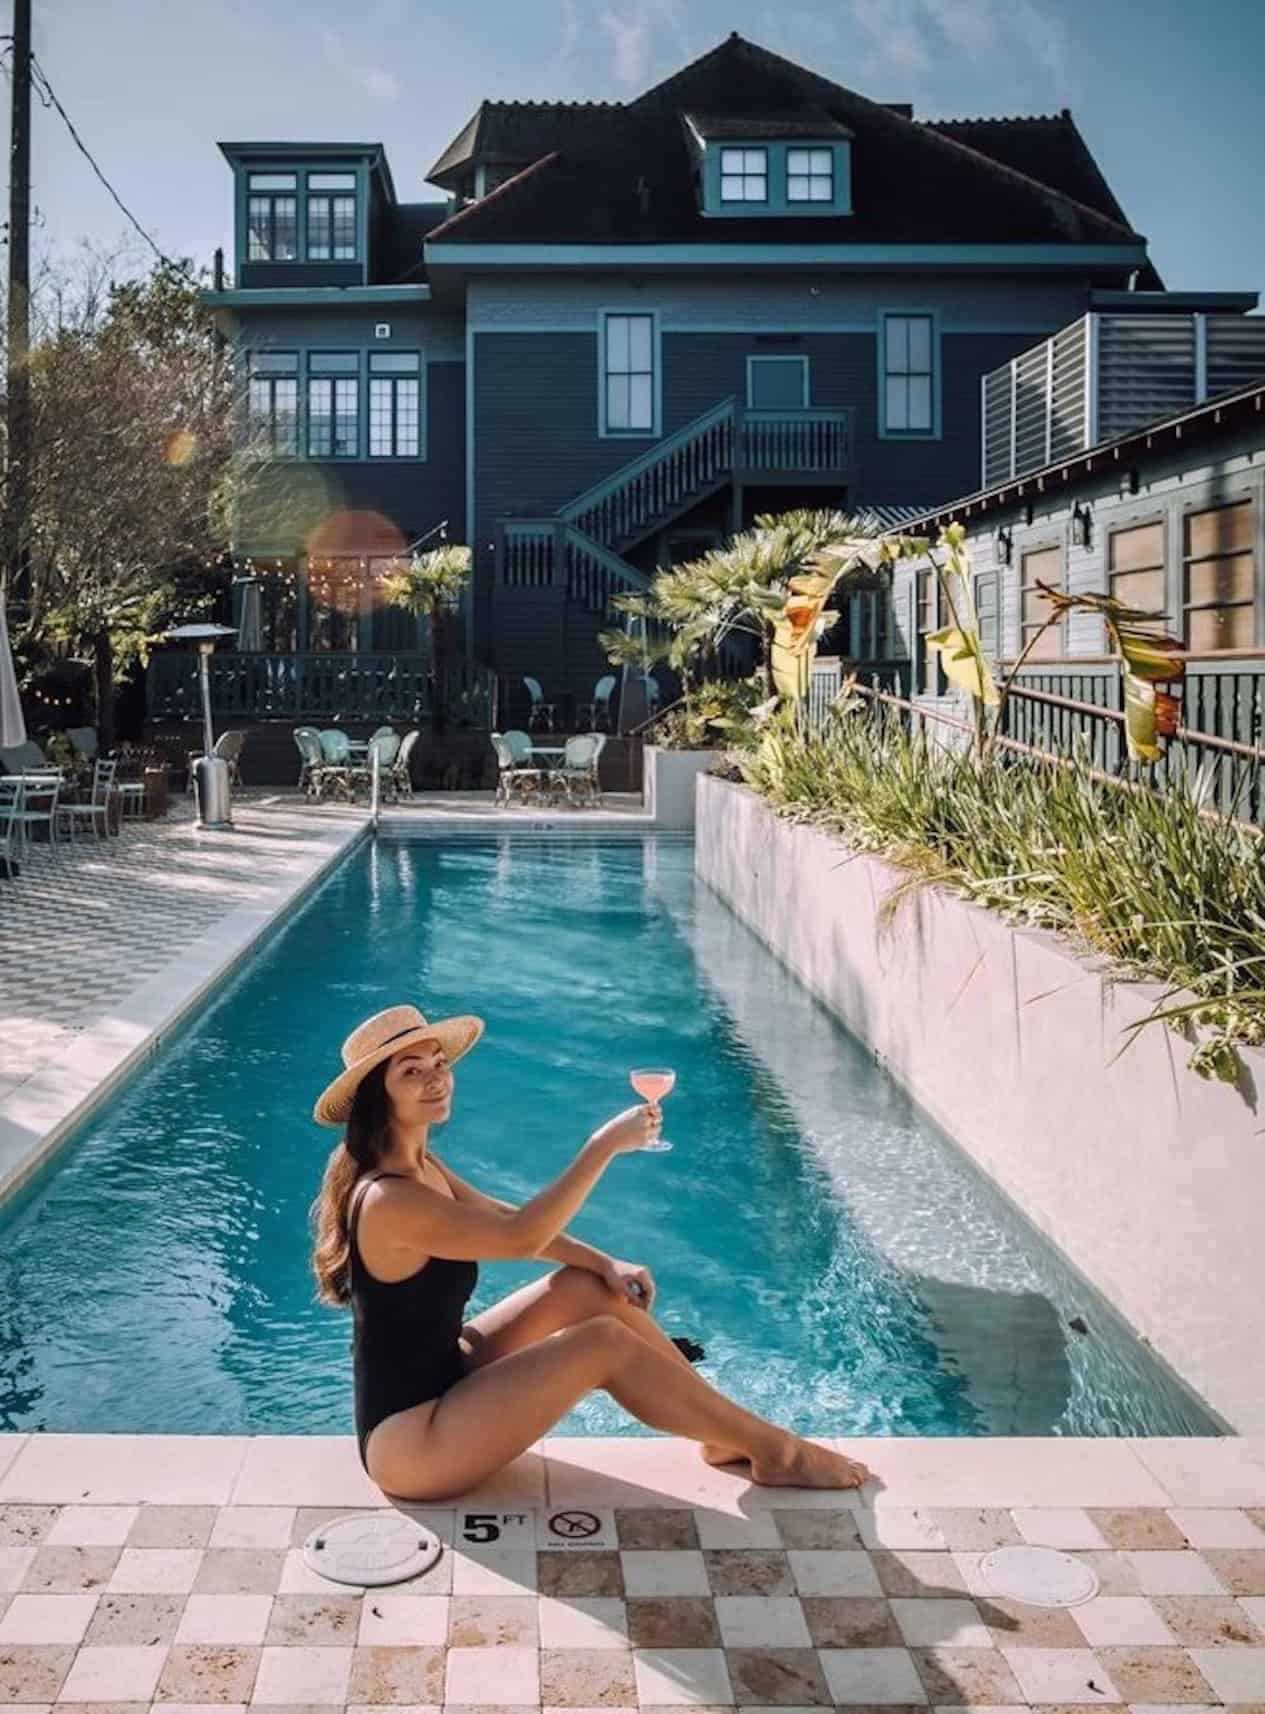 Woman posing by a residential swimming pool in a black one-piece bathing suit.